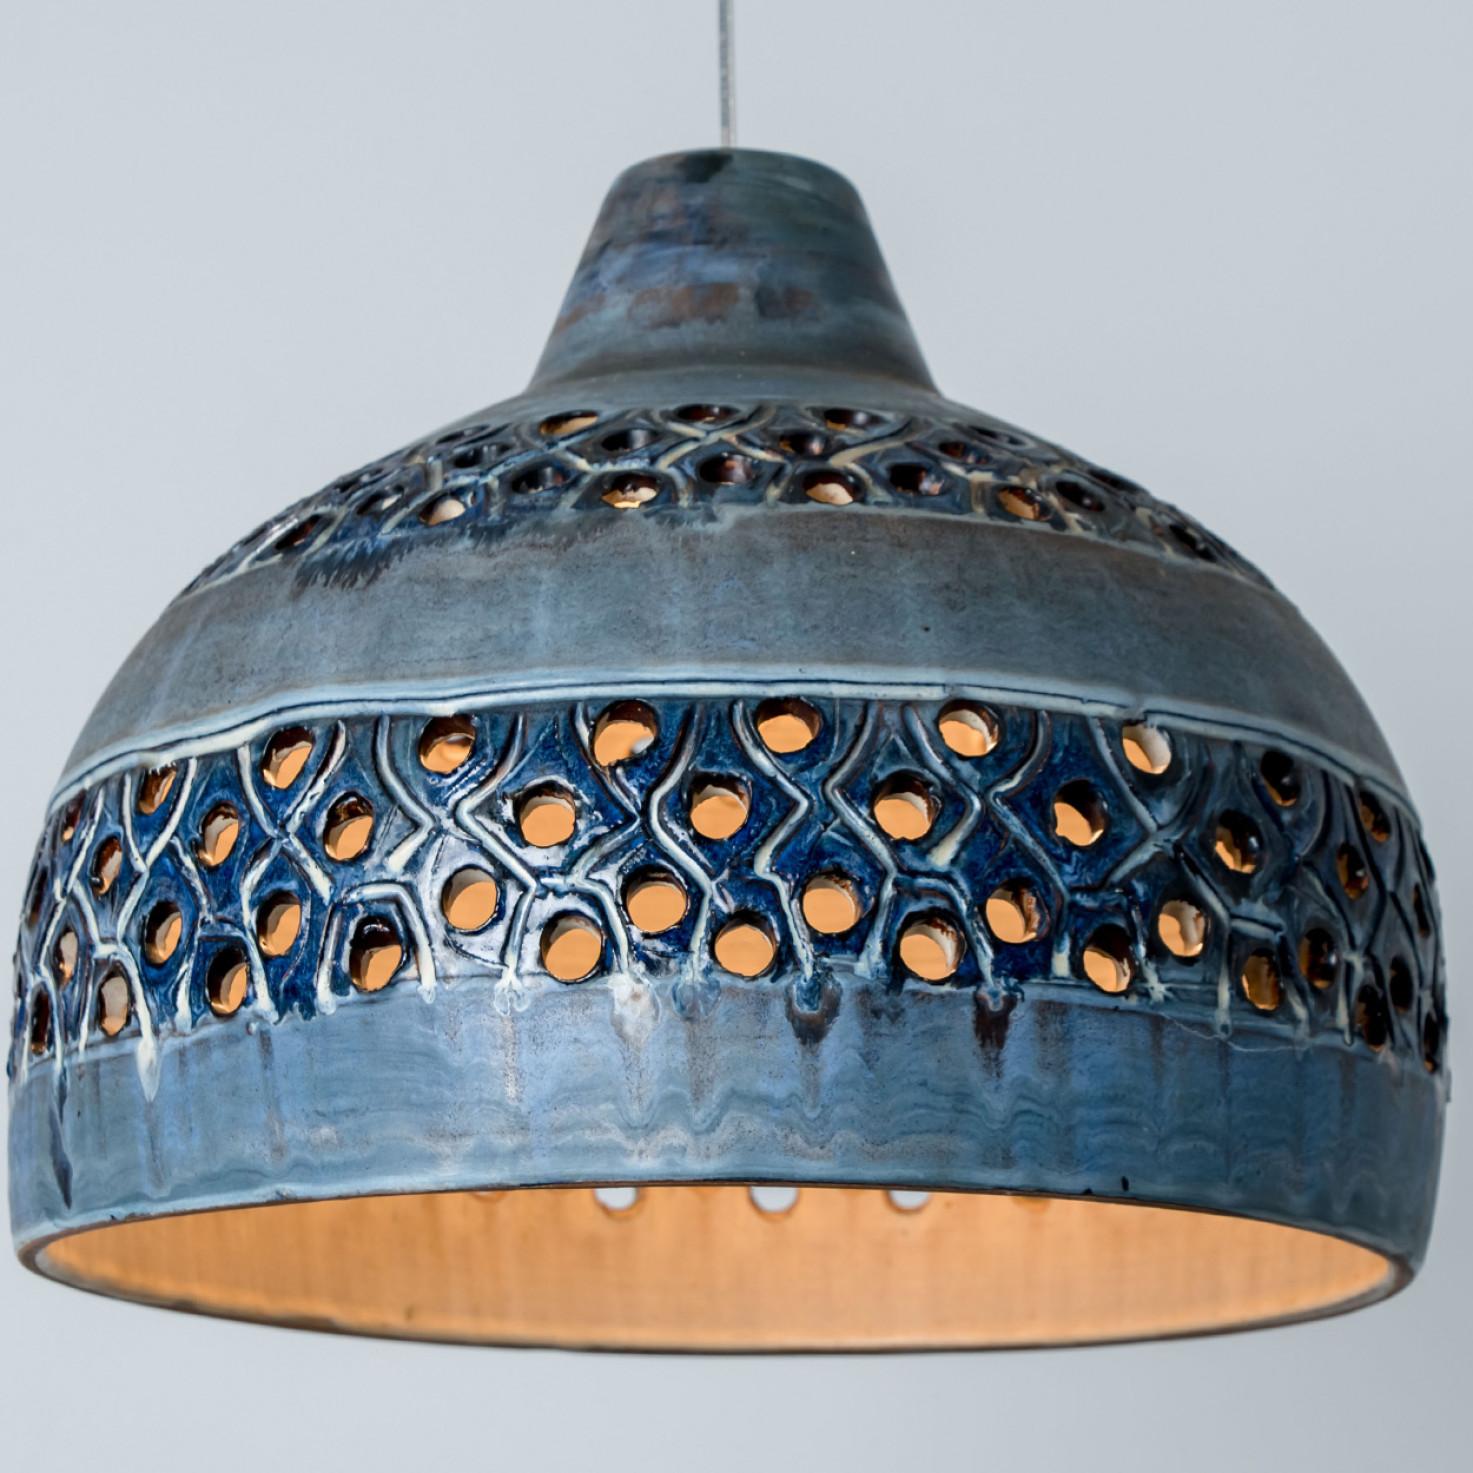 Stunning small round hanging lamp with a bowl-like shape, made with rich blue colored ceramics, manufactured in the 1970s in Denmark. We also have a multitude of unique colored ceramic light sets and arrangements, all available in the front store. 